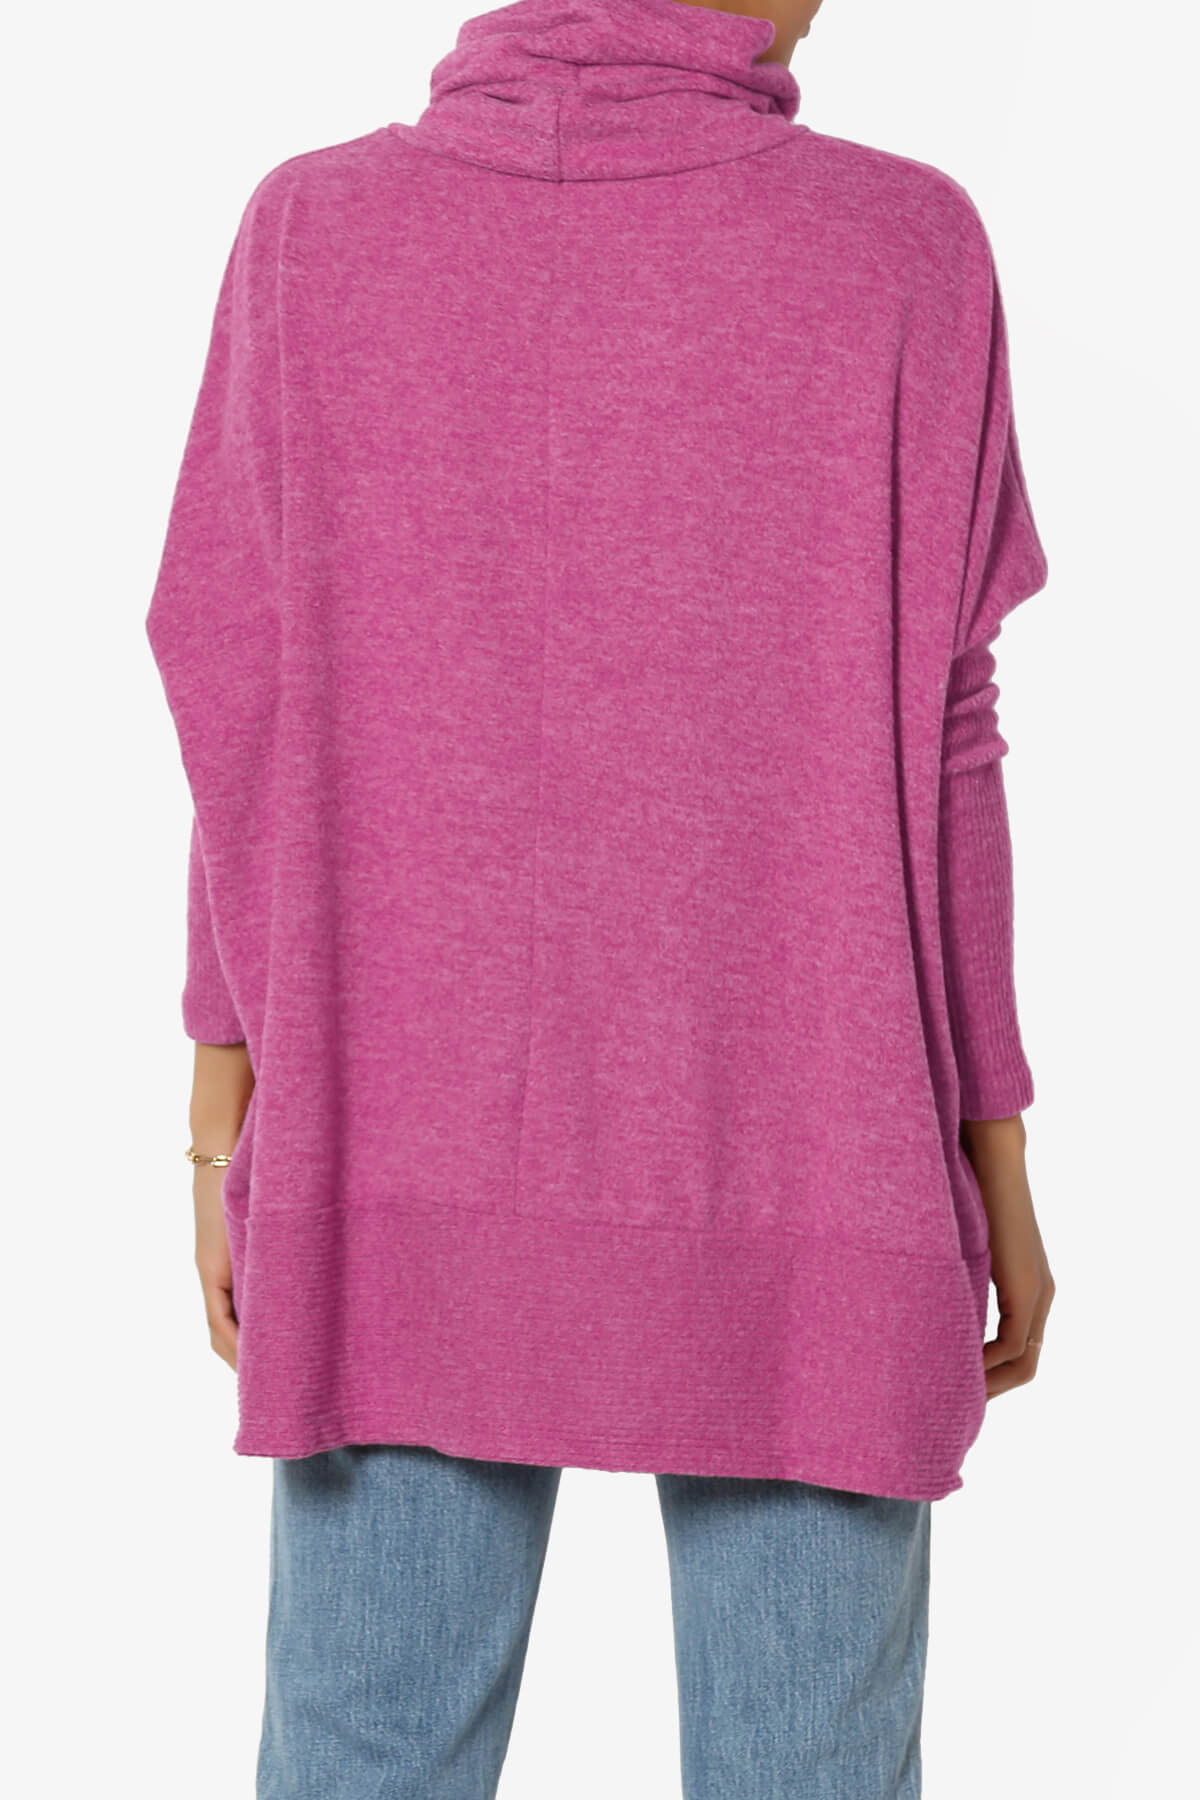 Load image into Gallery viewer, Barclay Cowl Neck Melange Knit Oversized Sweater
